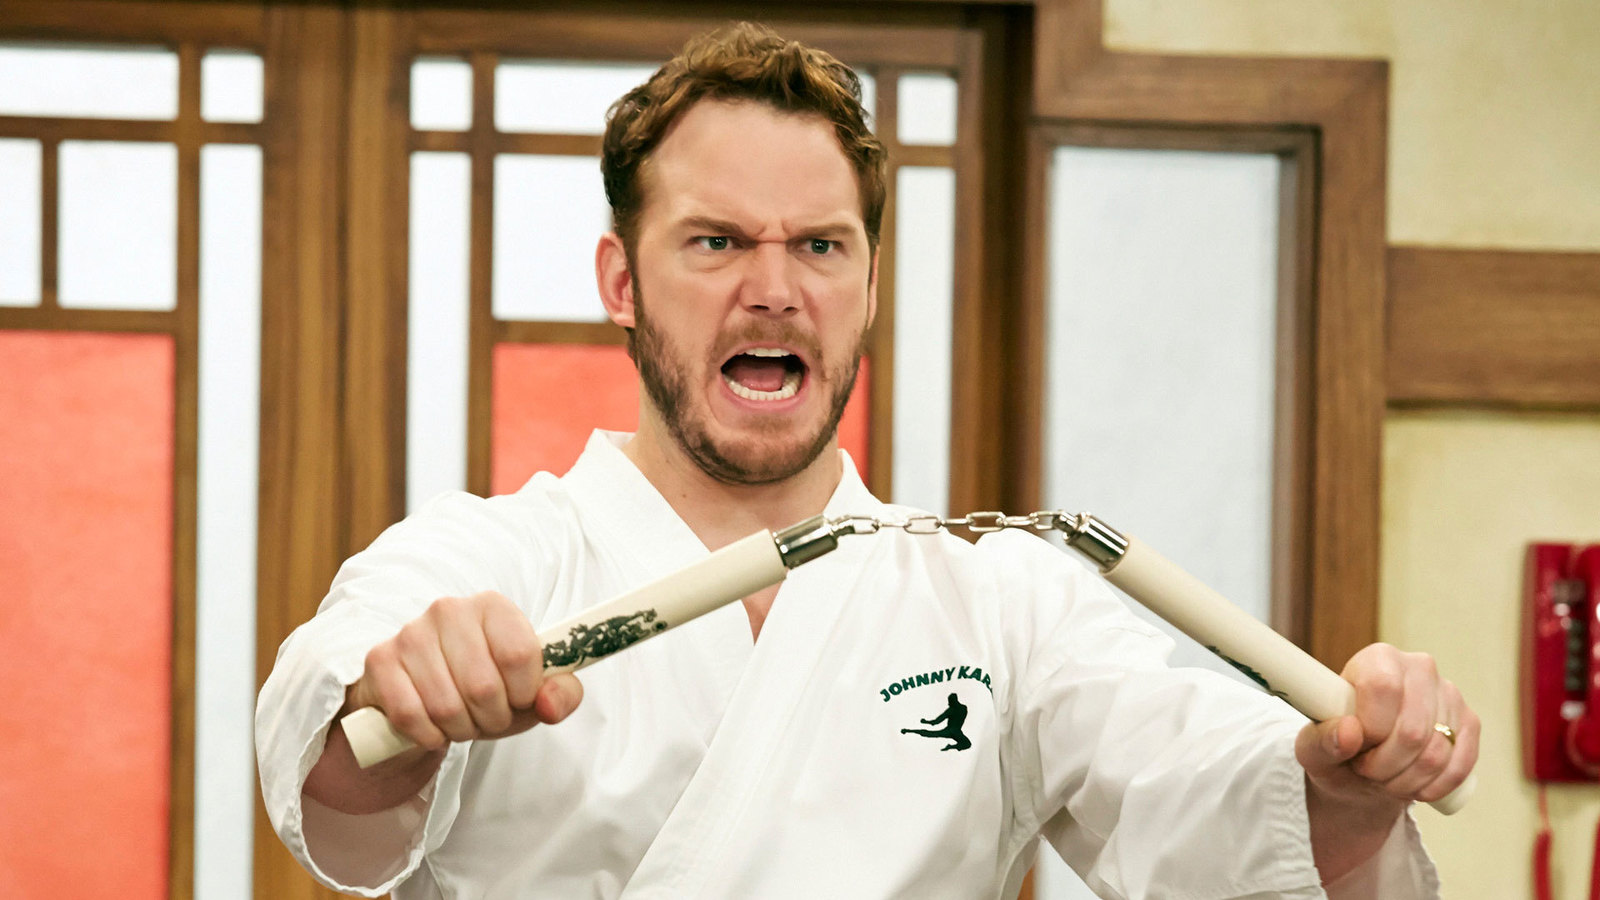 The best Andy Dwyer moments from 'Parks and Rec' | Yardbarker